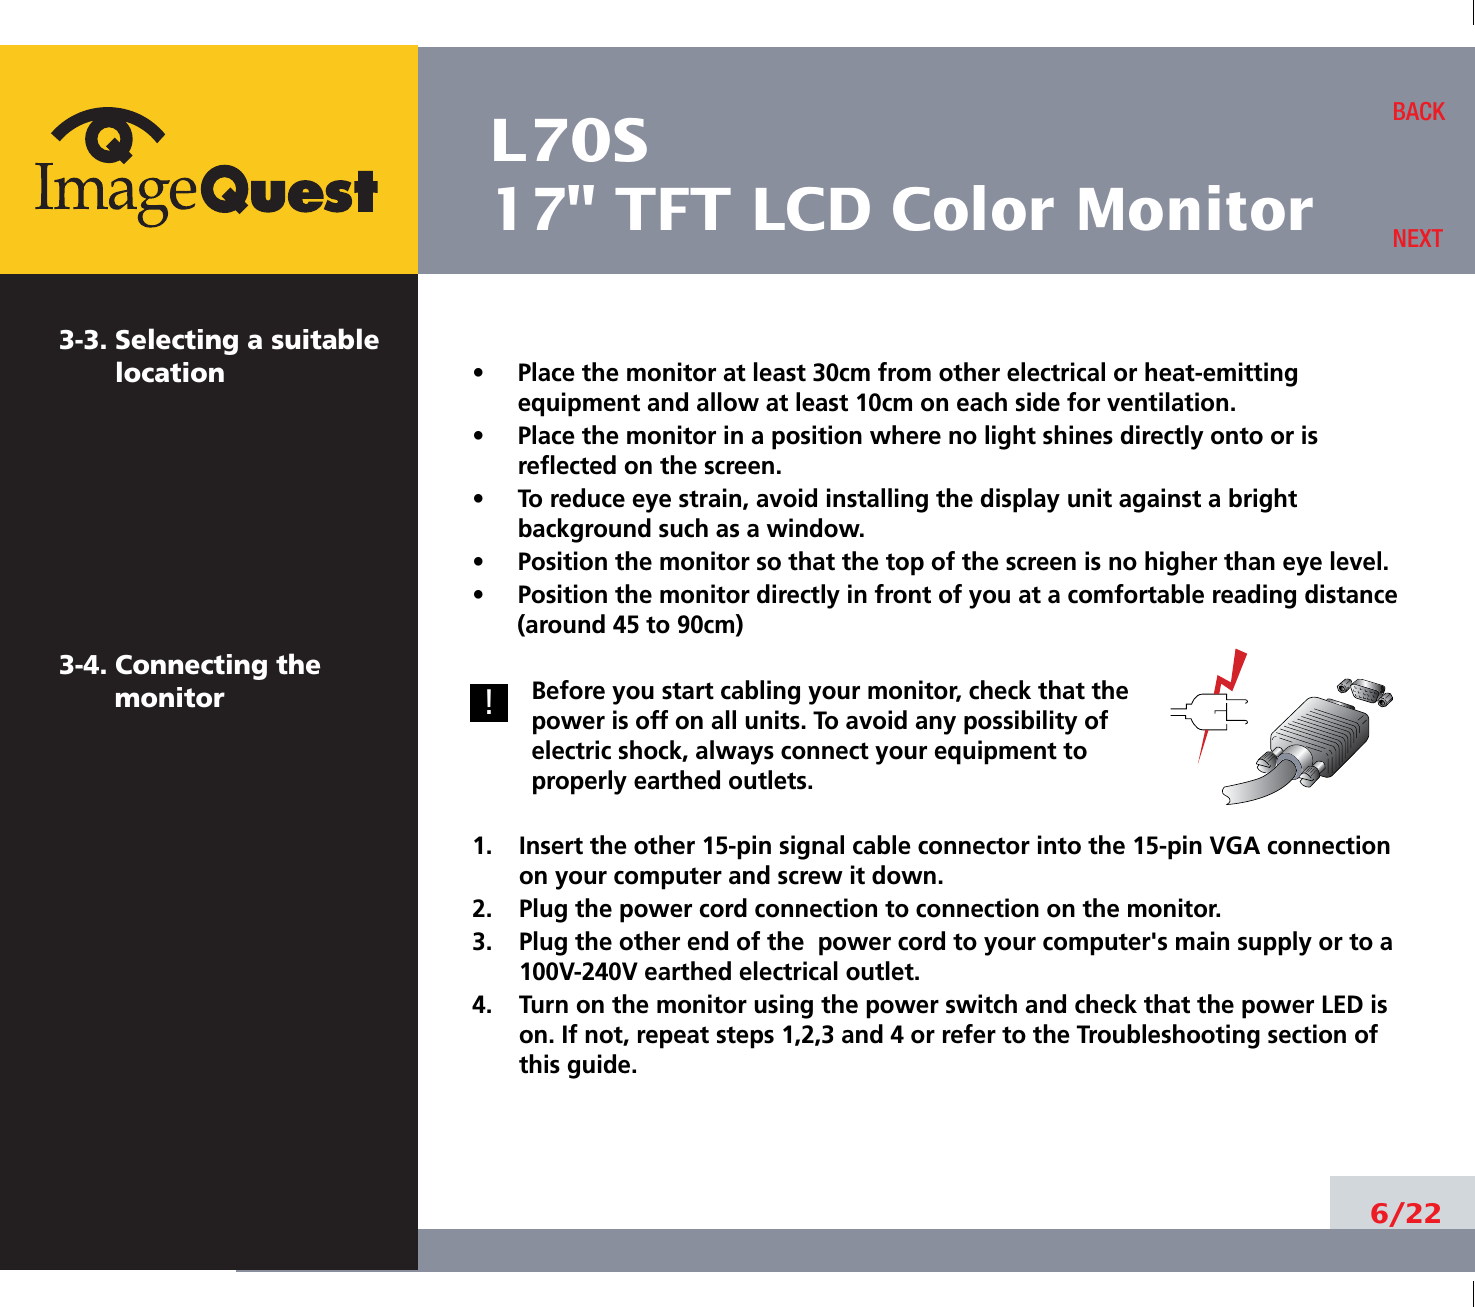 L70S17&quot; TFT LCD Color Monitor6/22BACKNEXT3-3. Selecting a suitablelocation3-4. Connecting the monitor•     Place the monitor at least 30cm from other electrical or heat-emittingequipment and allow at least 10cm on each side for ventilation.•     Place the monitor in a position where no light shines directly onto or isreflected on the screen.•     To reduce eye strain, avoid installing the display unit against a brightbackground such as a window.•     Position the monitor so that the top of the screen is no higher than eye level.•     Position the monitor directly in front of you at a comfortable reading distance(around 45 to 90cm) Before you start cabling your monitor, check that thepower is off on all units. To avoid any possibility ofelectric shock, always connect your equipment toproperly earthed outlets.1.    Insert the other 15-pin signal cable connector into the 15-pin VGA connectionon your computer and screw it down. 2.    Plug the power cord connection to connection on the monitor.3.    Plug the other end of the  power cord to your computer&apos;s main supply or to a100V-240V earthed electrical outlet.4.    Turn on the monitor using the power switch and check that the power LED ison. If not, repeat steps 1,2,3 and 4 or refer to the Troubleshooting section ofthis guide.!!